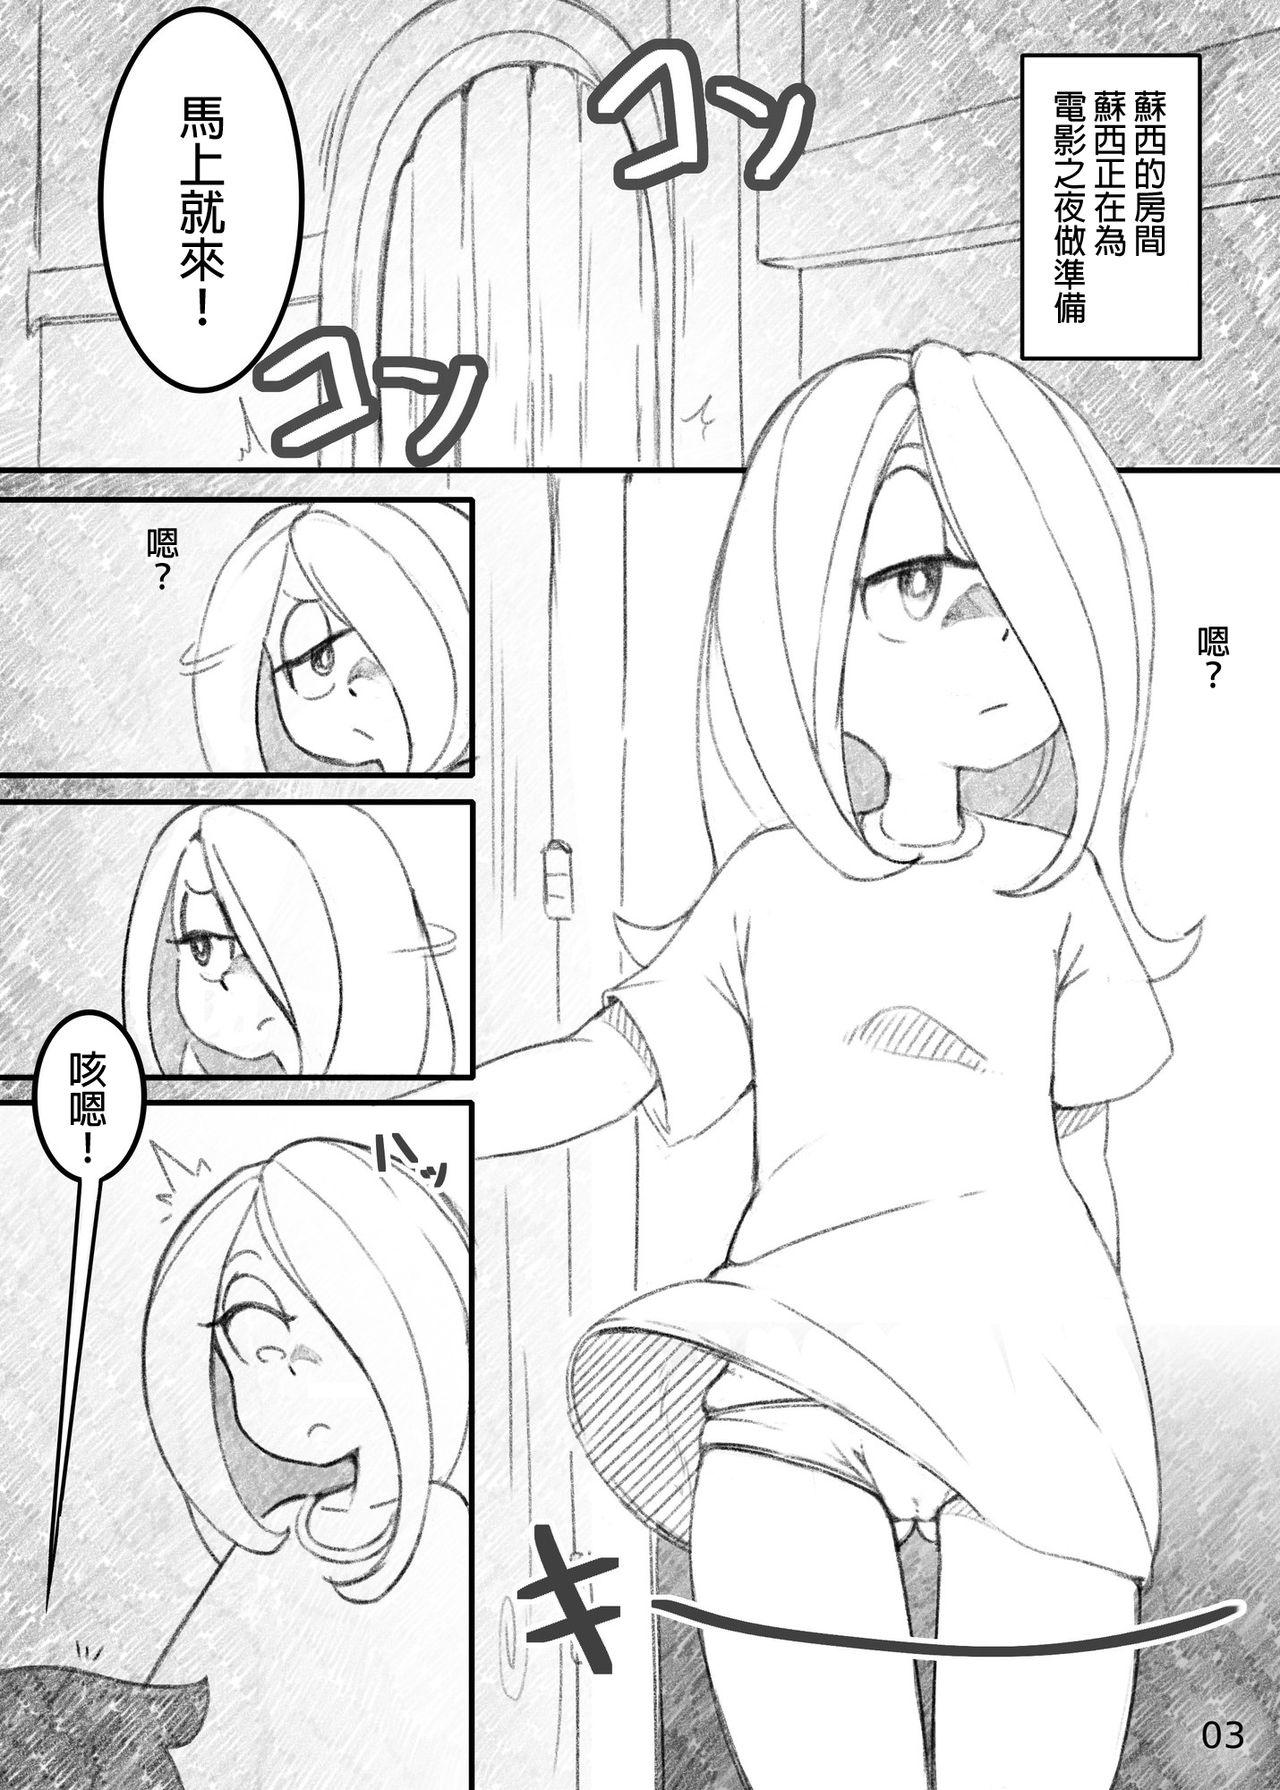 Eating Movie Night - Little witch academia Eat - Page 3